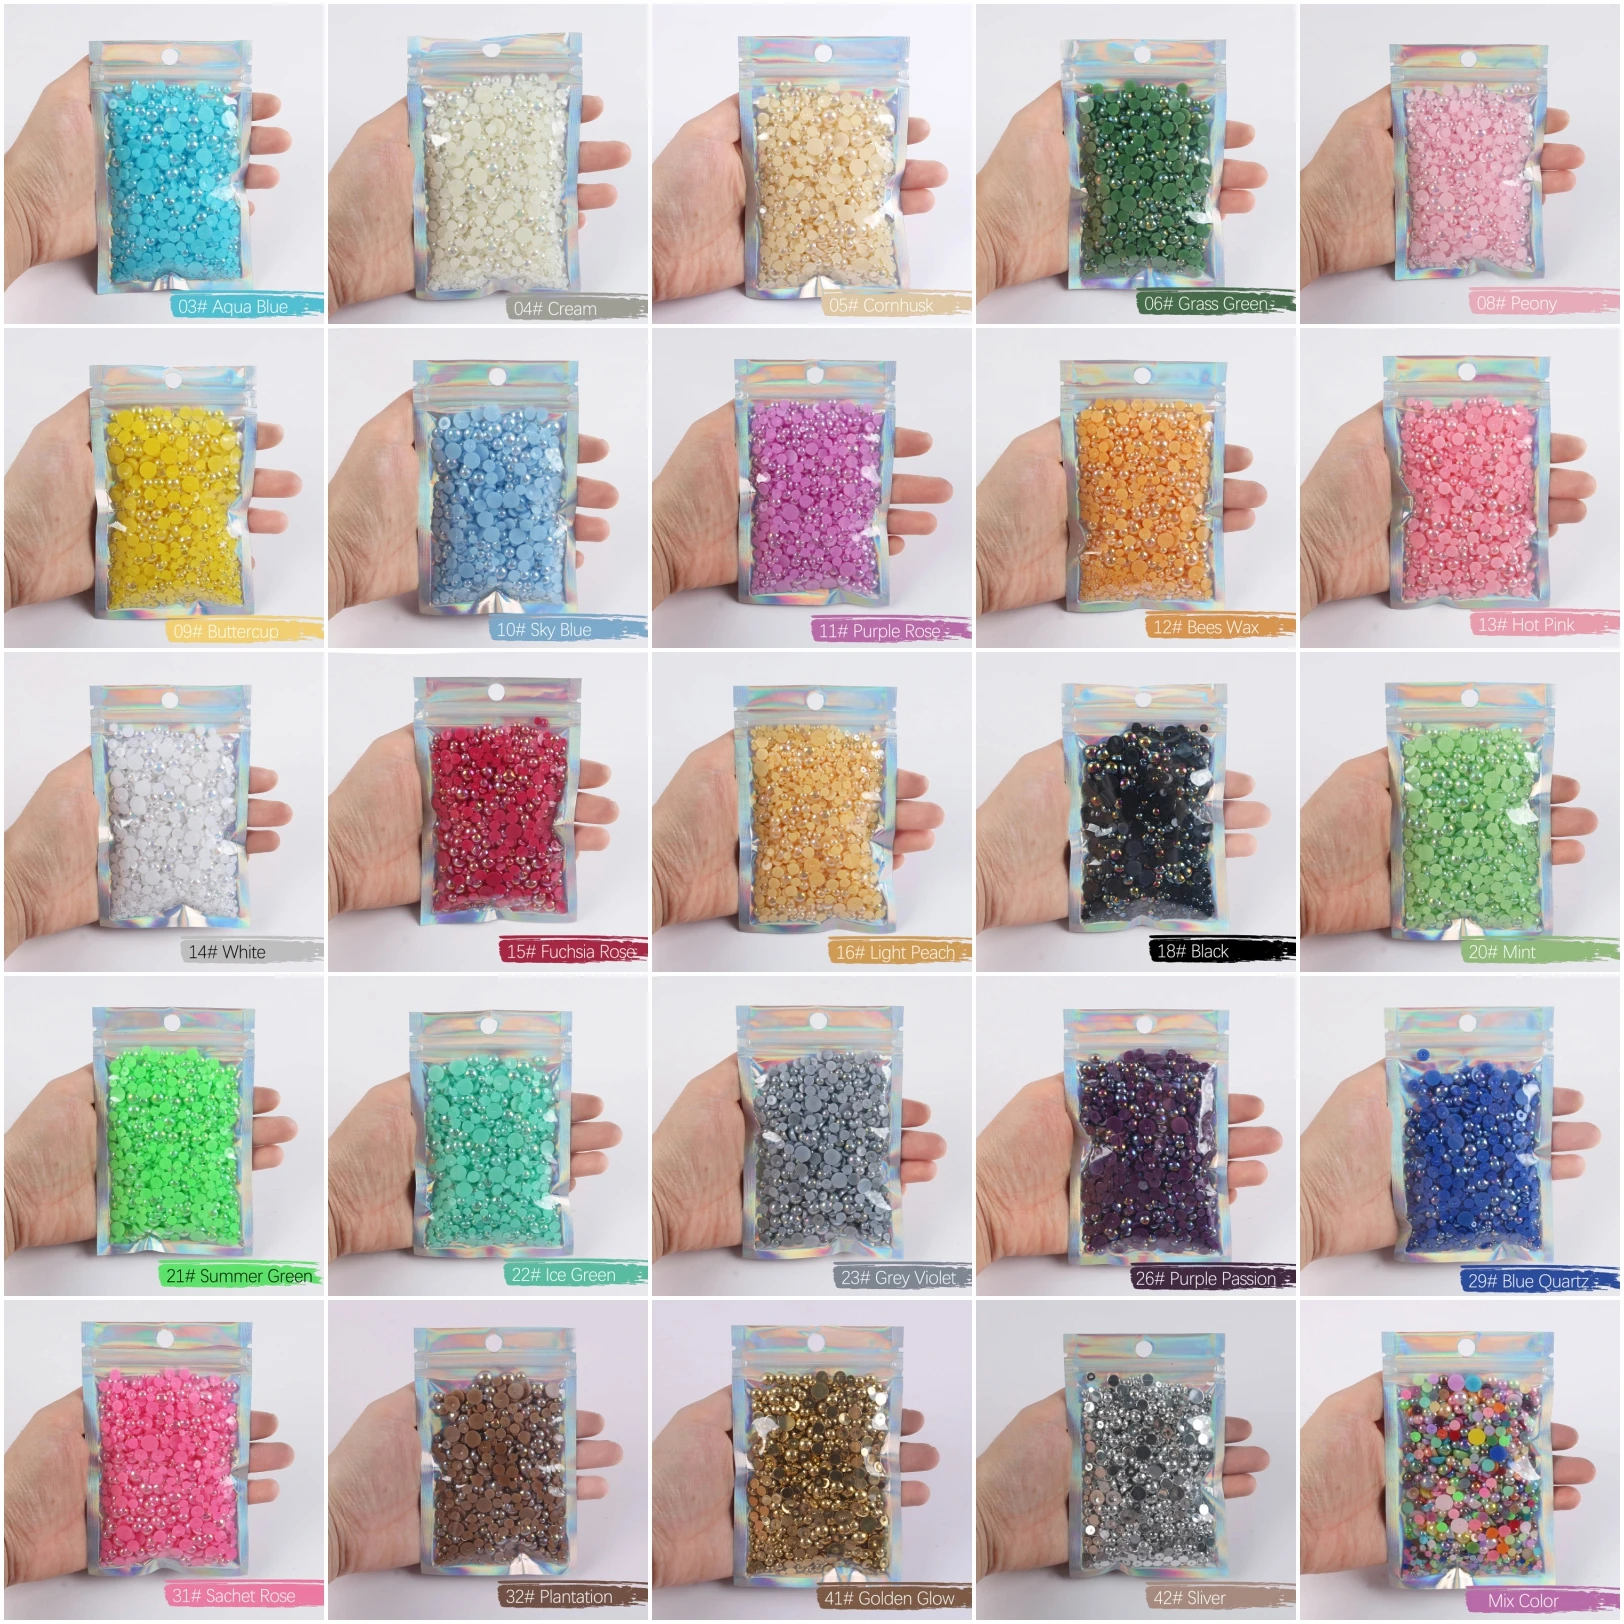 

Mix Size 1000PCS 3 4 5 6 8mm Imitation Pearl Half Round Beads Flat Back AB Pearls ABS Beads or DIY Nail Art Crafts Decoration